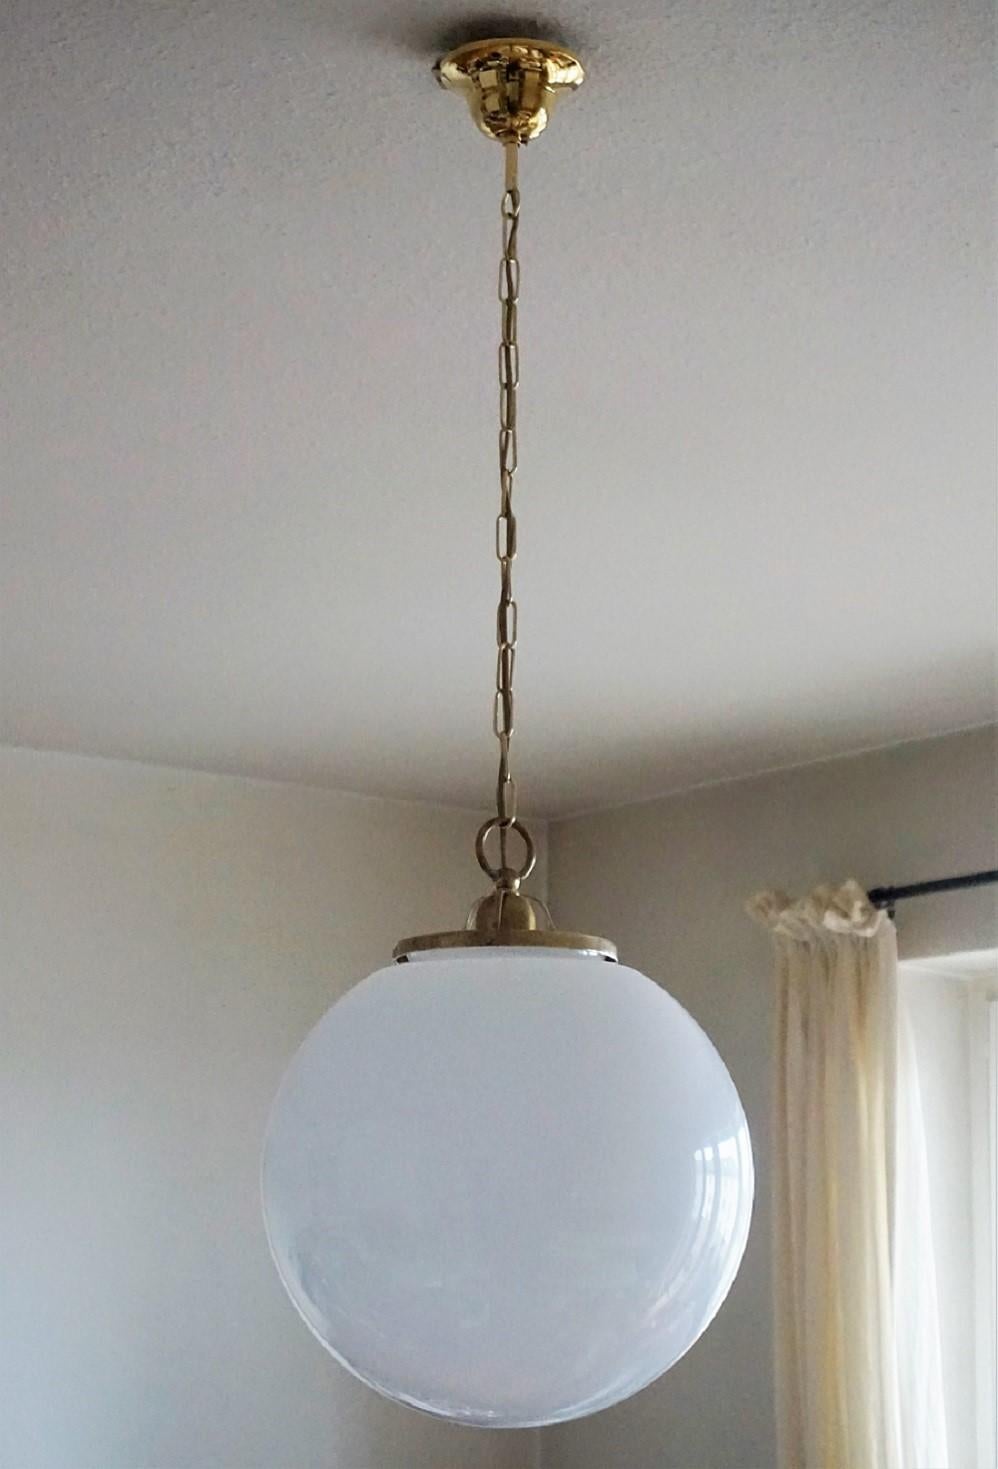 pair of large hand blown opaline glass ball pendants, brass-mounted with a single E-27 light socket for a large sized bulb, 1950s.
Measures: Diameter 14